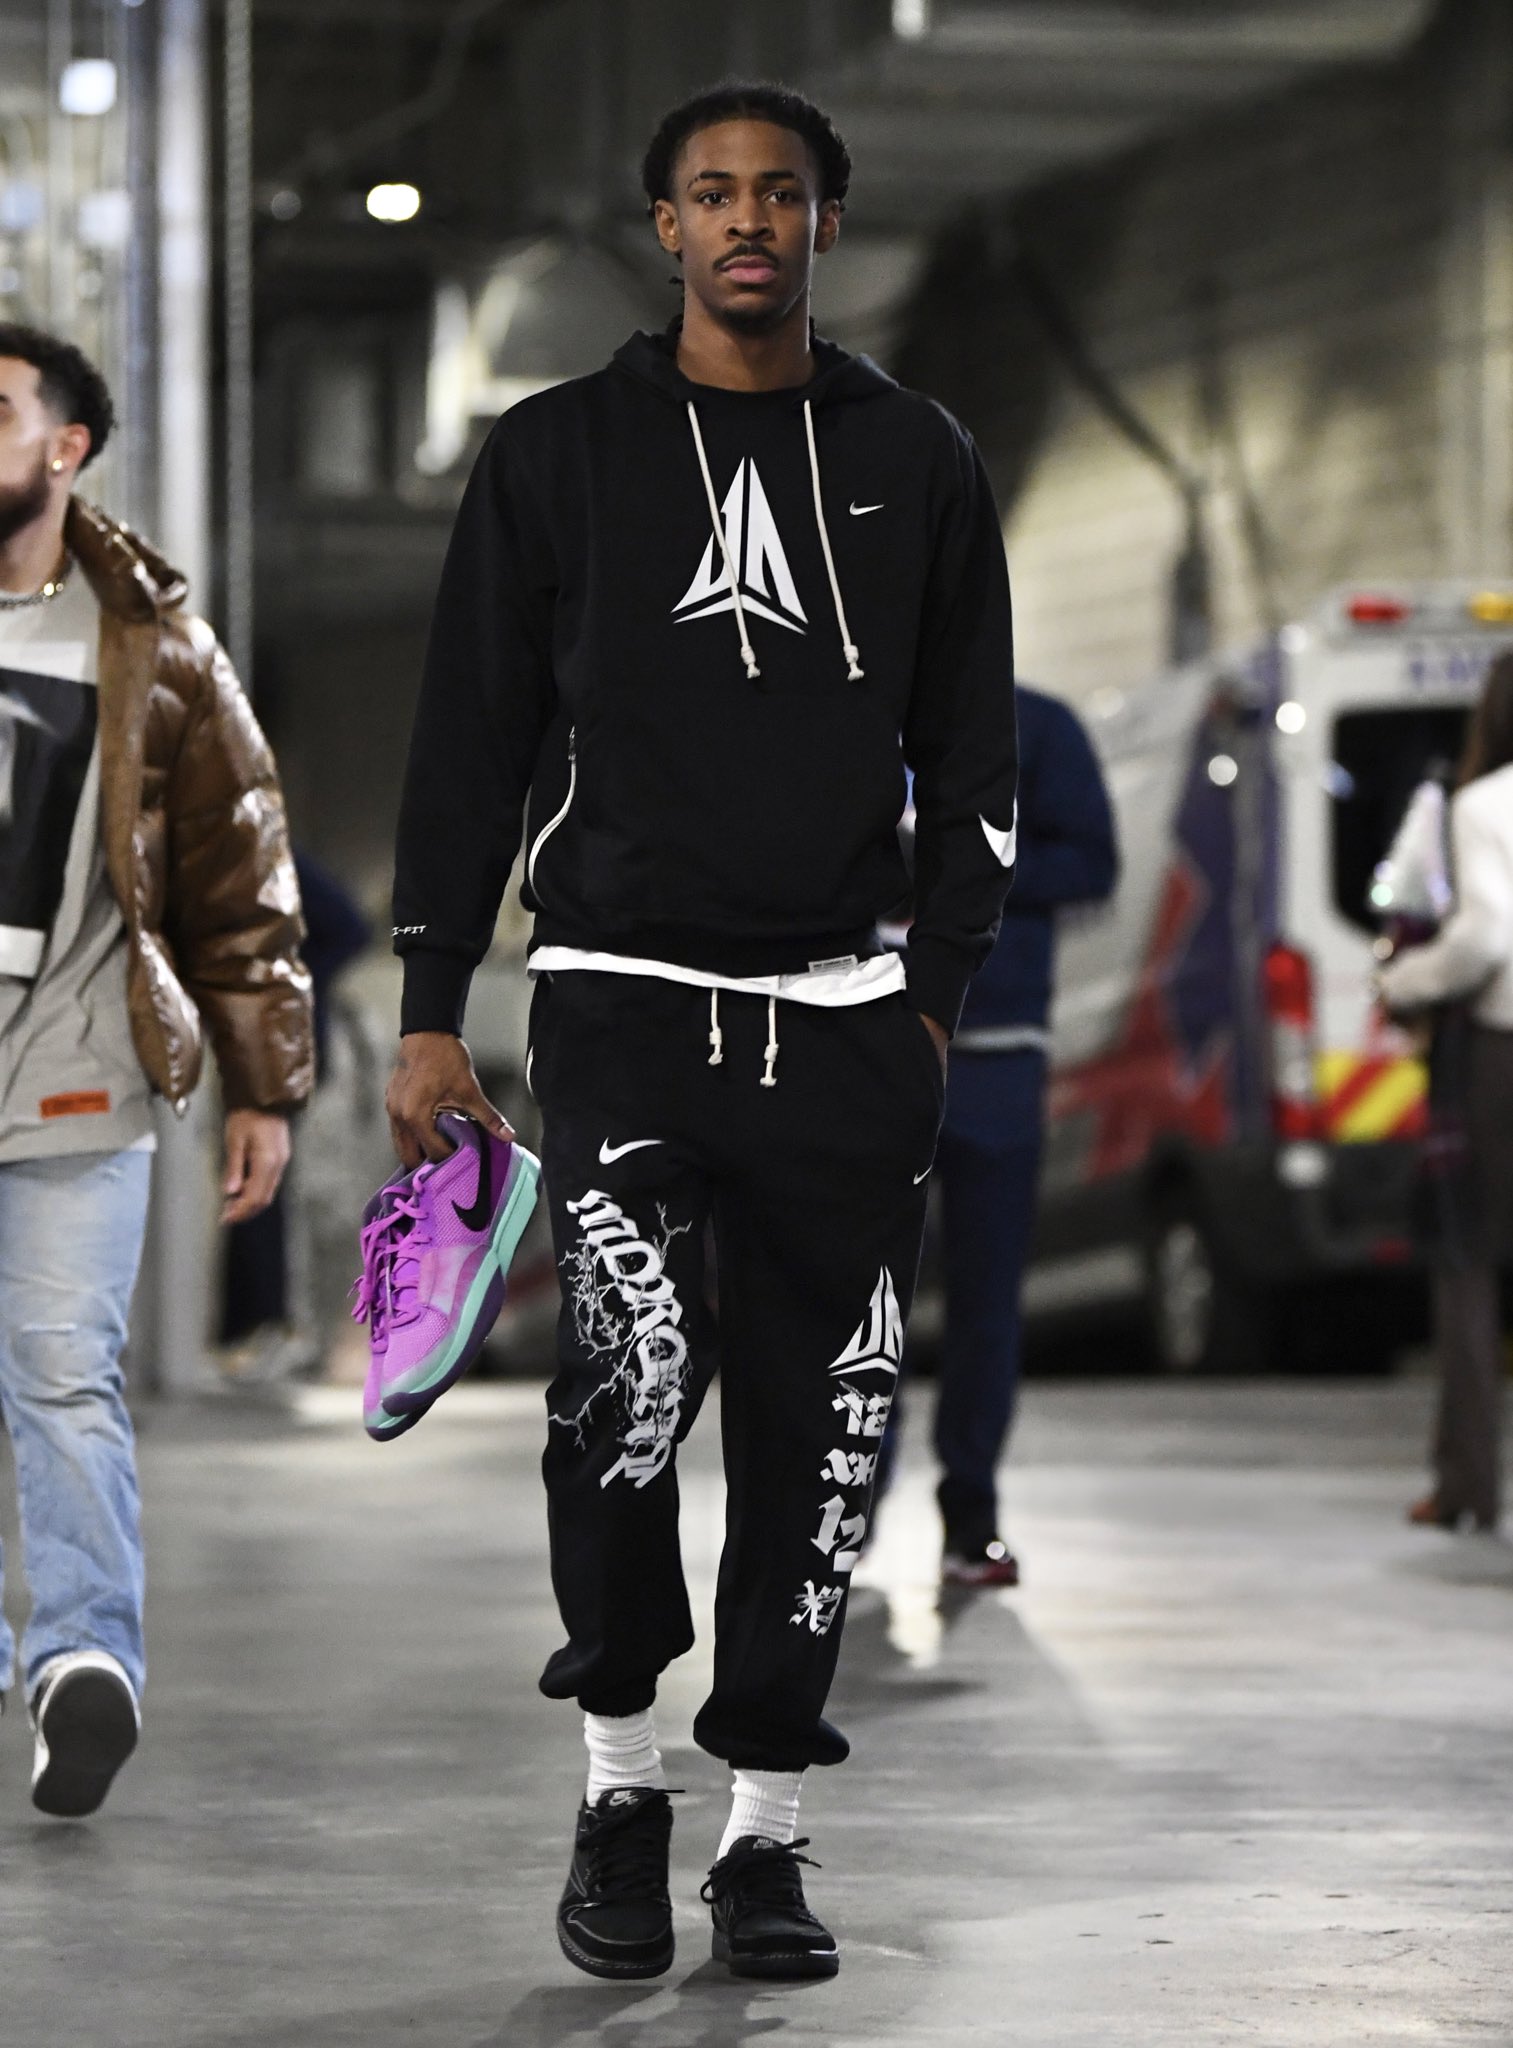 Ja Morant: Blue Hoodie And Pink Sneakers - Iconic Celebrity Outfits